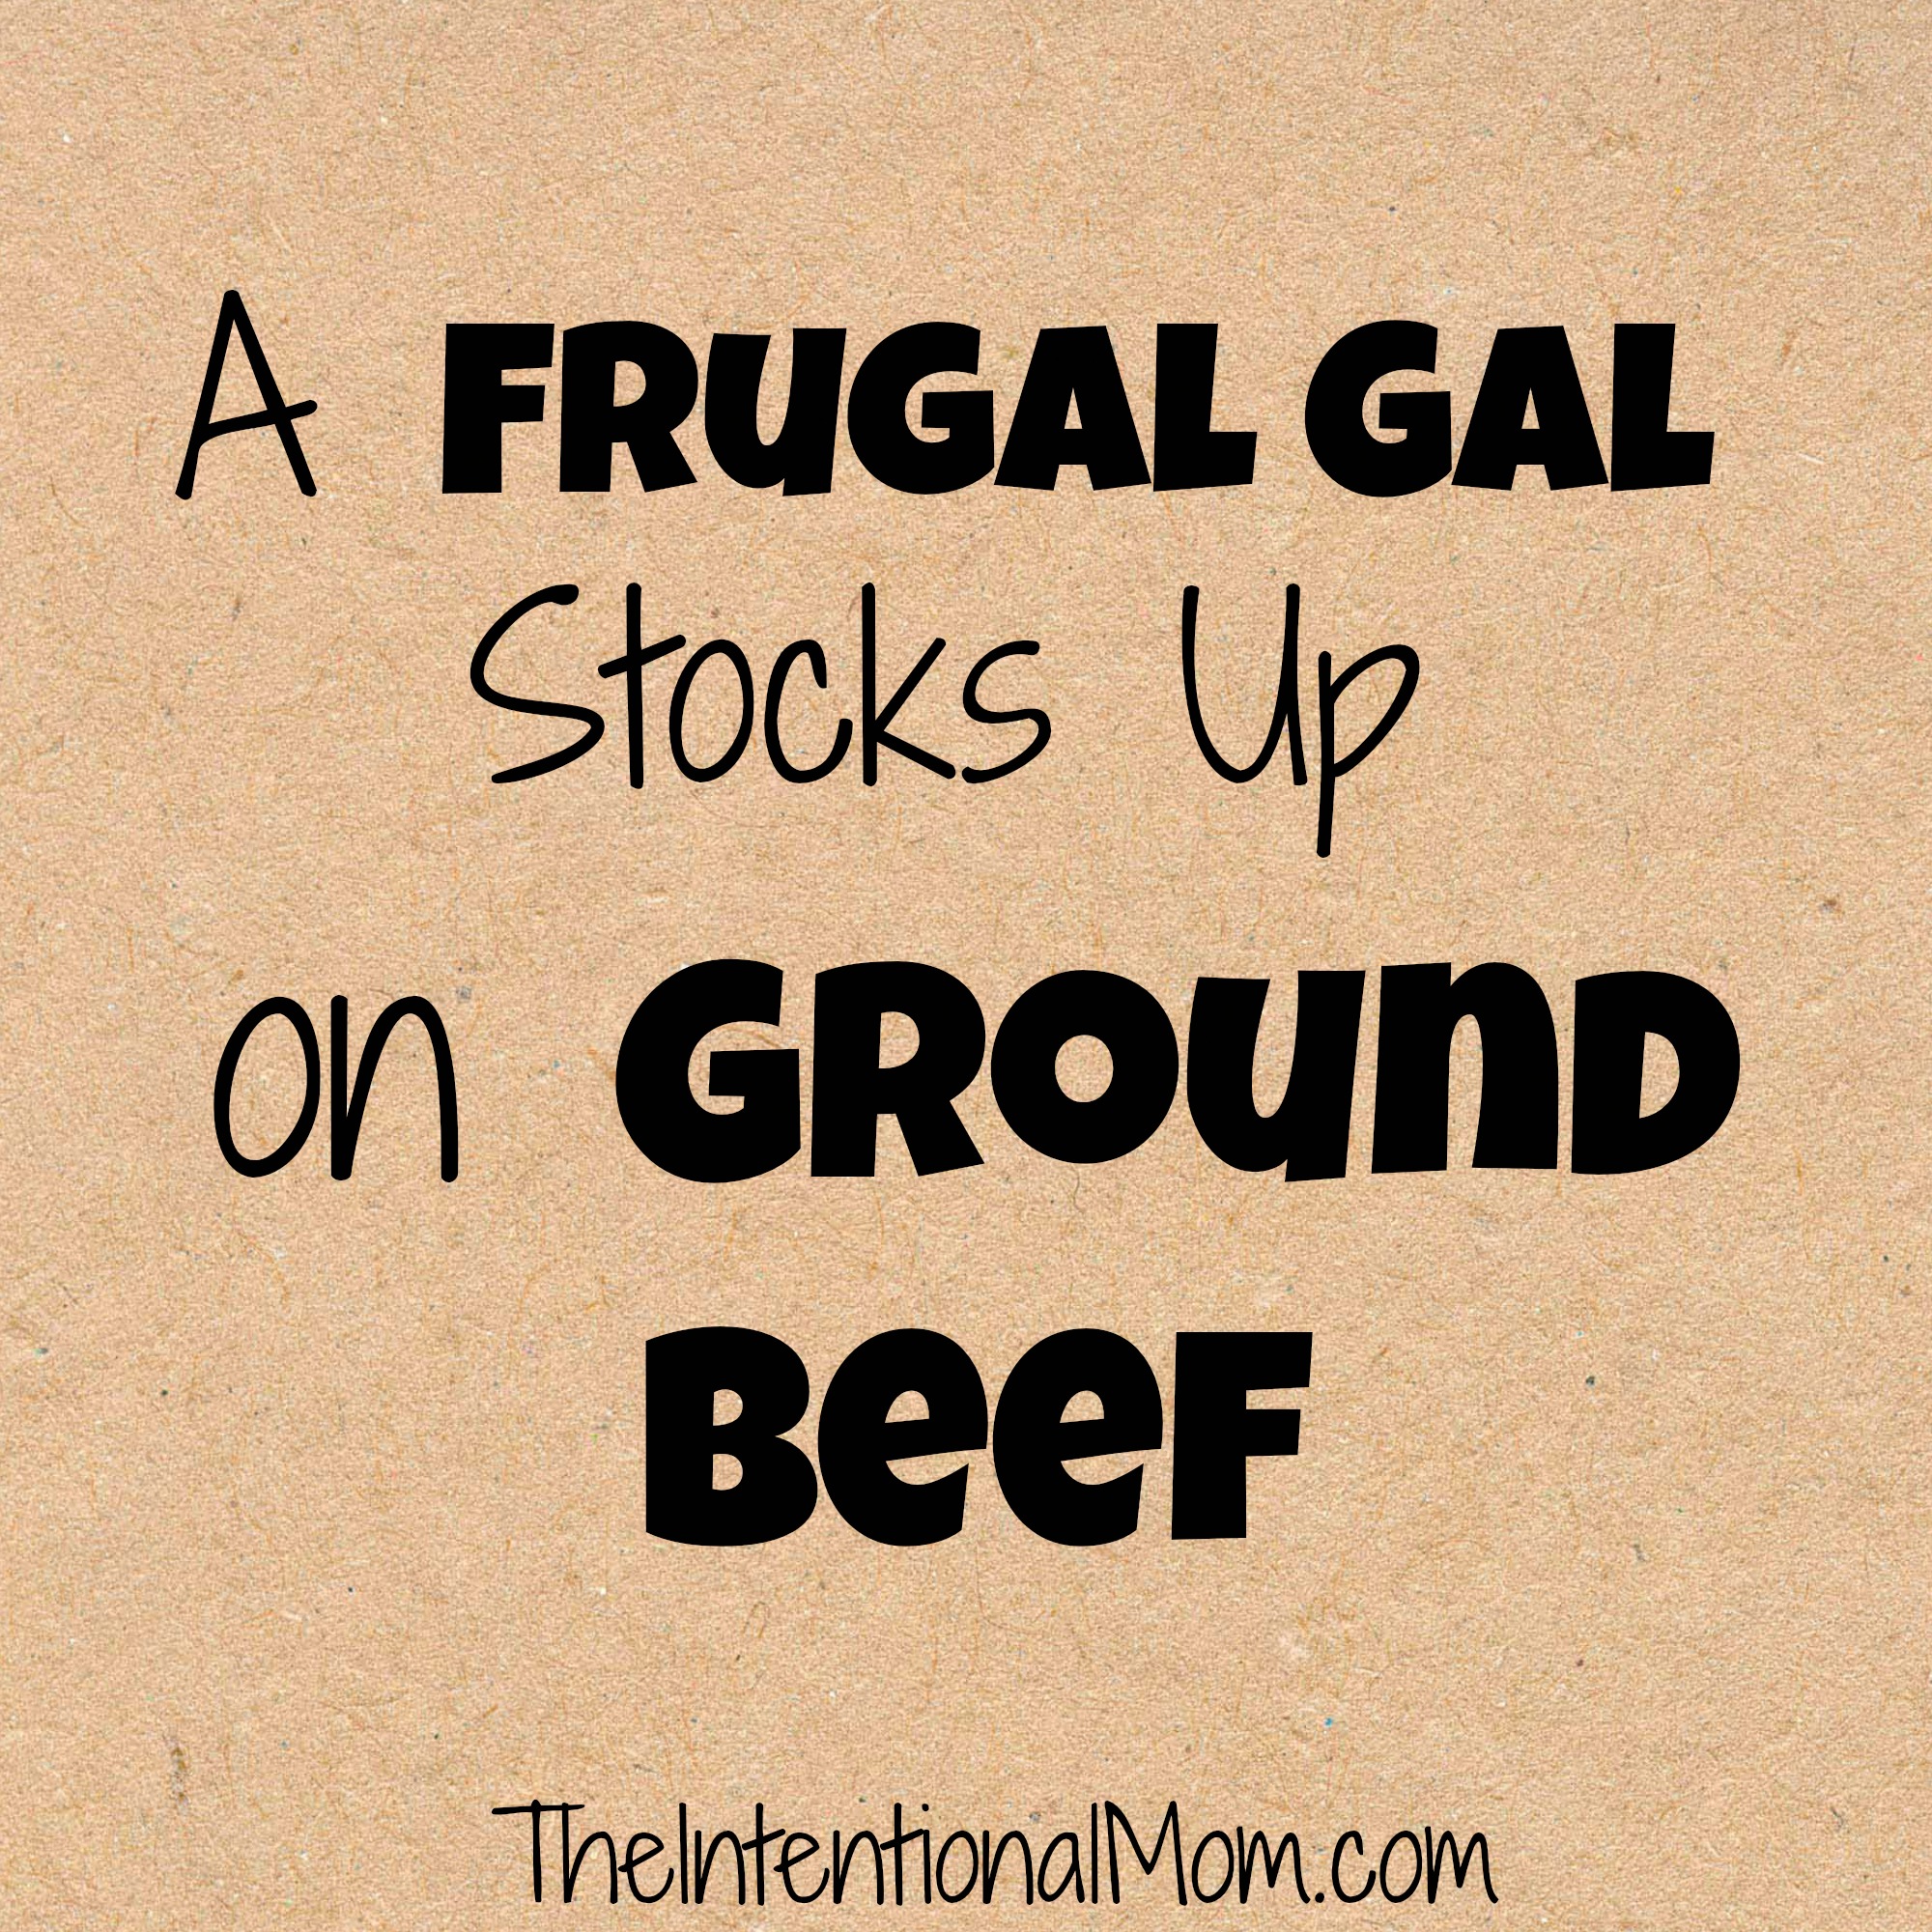 A Frugal Gal Stocks Up on Ground Beef